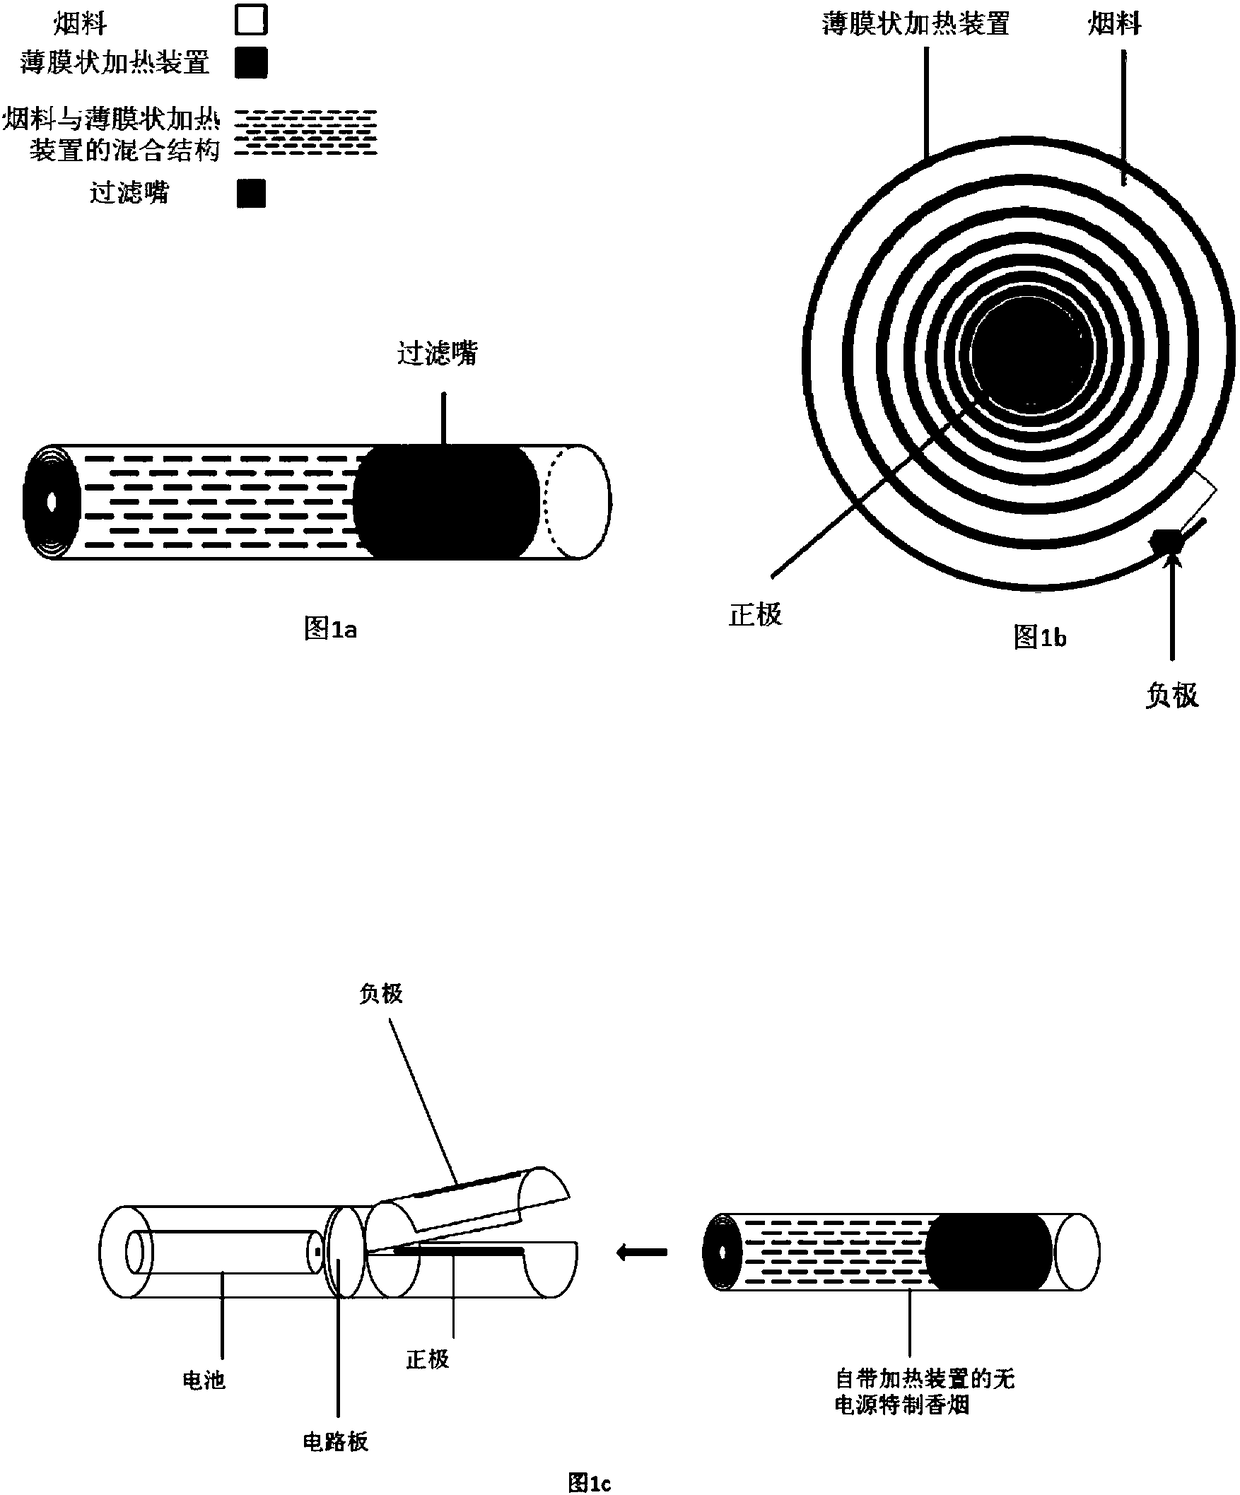 Heating device for electronic cigarettes and low temperature heating cigarettes